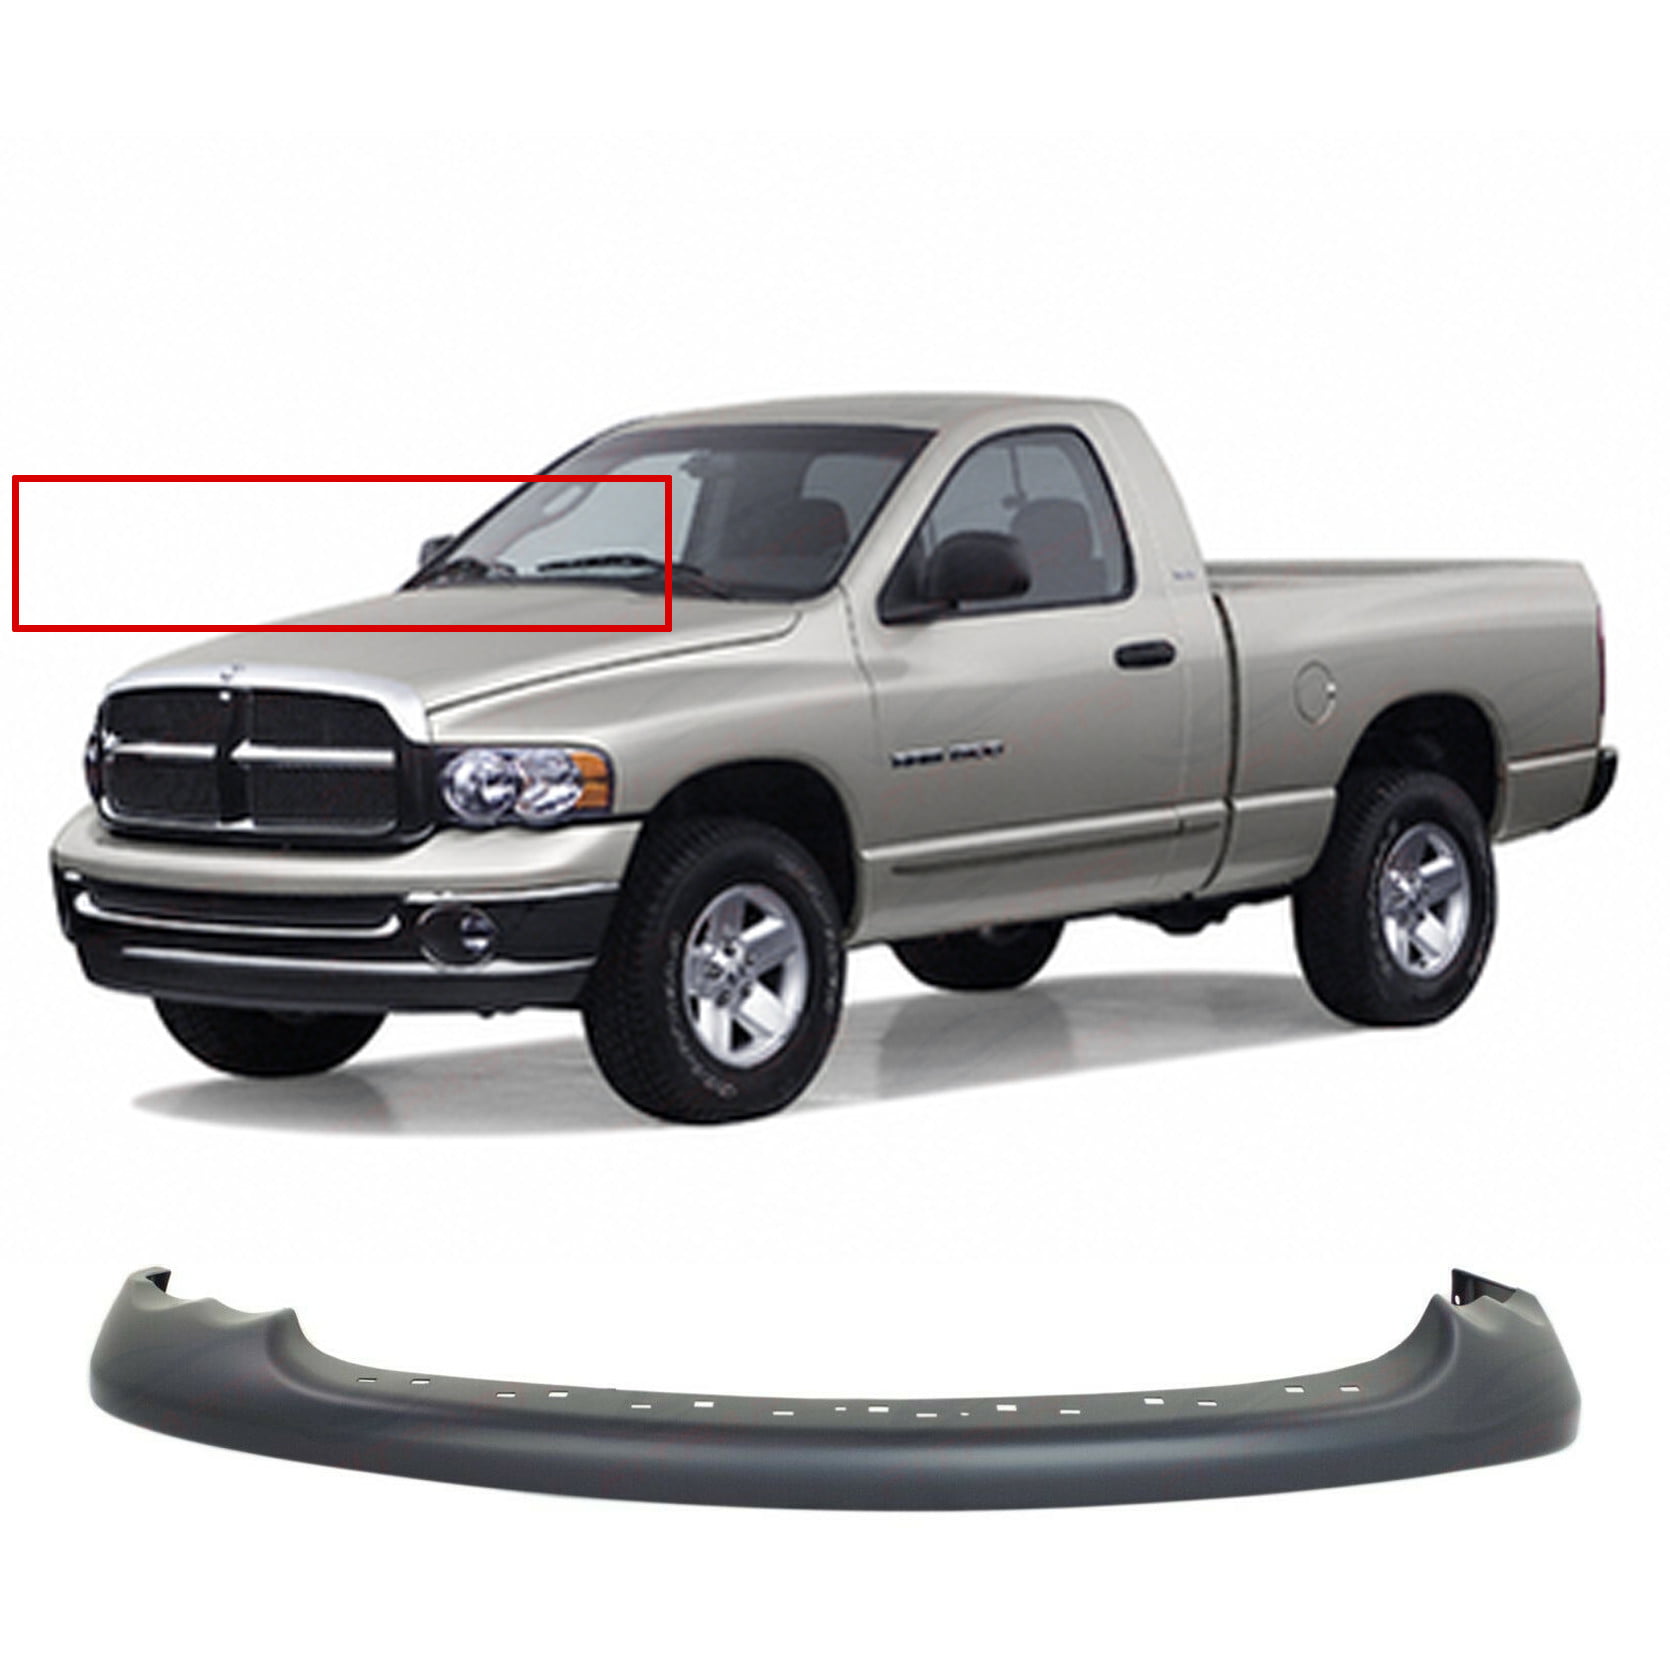 Reduce Glare Unpainted Primed Gray JSP Truck Cab Sun Visor w/LED Lights 1999-2016 Hardware Kit Included Compatible with Ford F150 Lightweight Fiberglass Material 